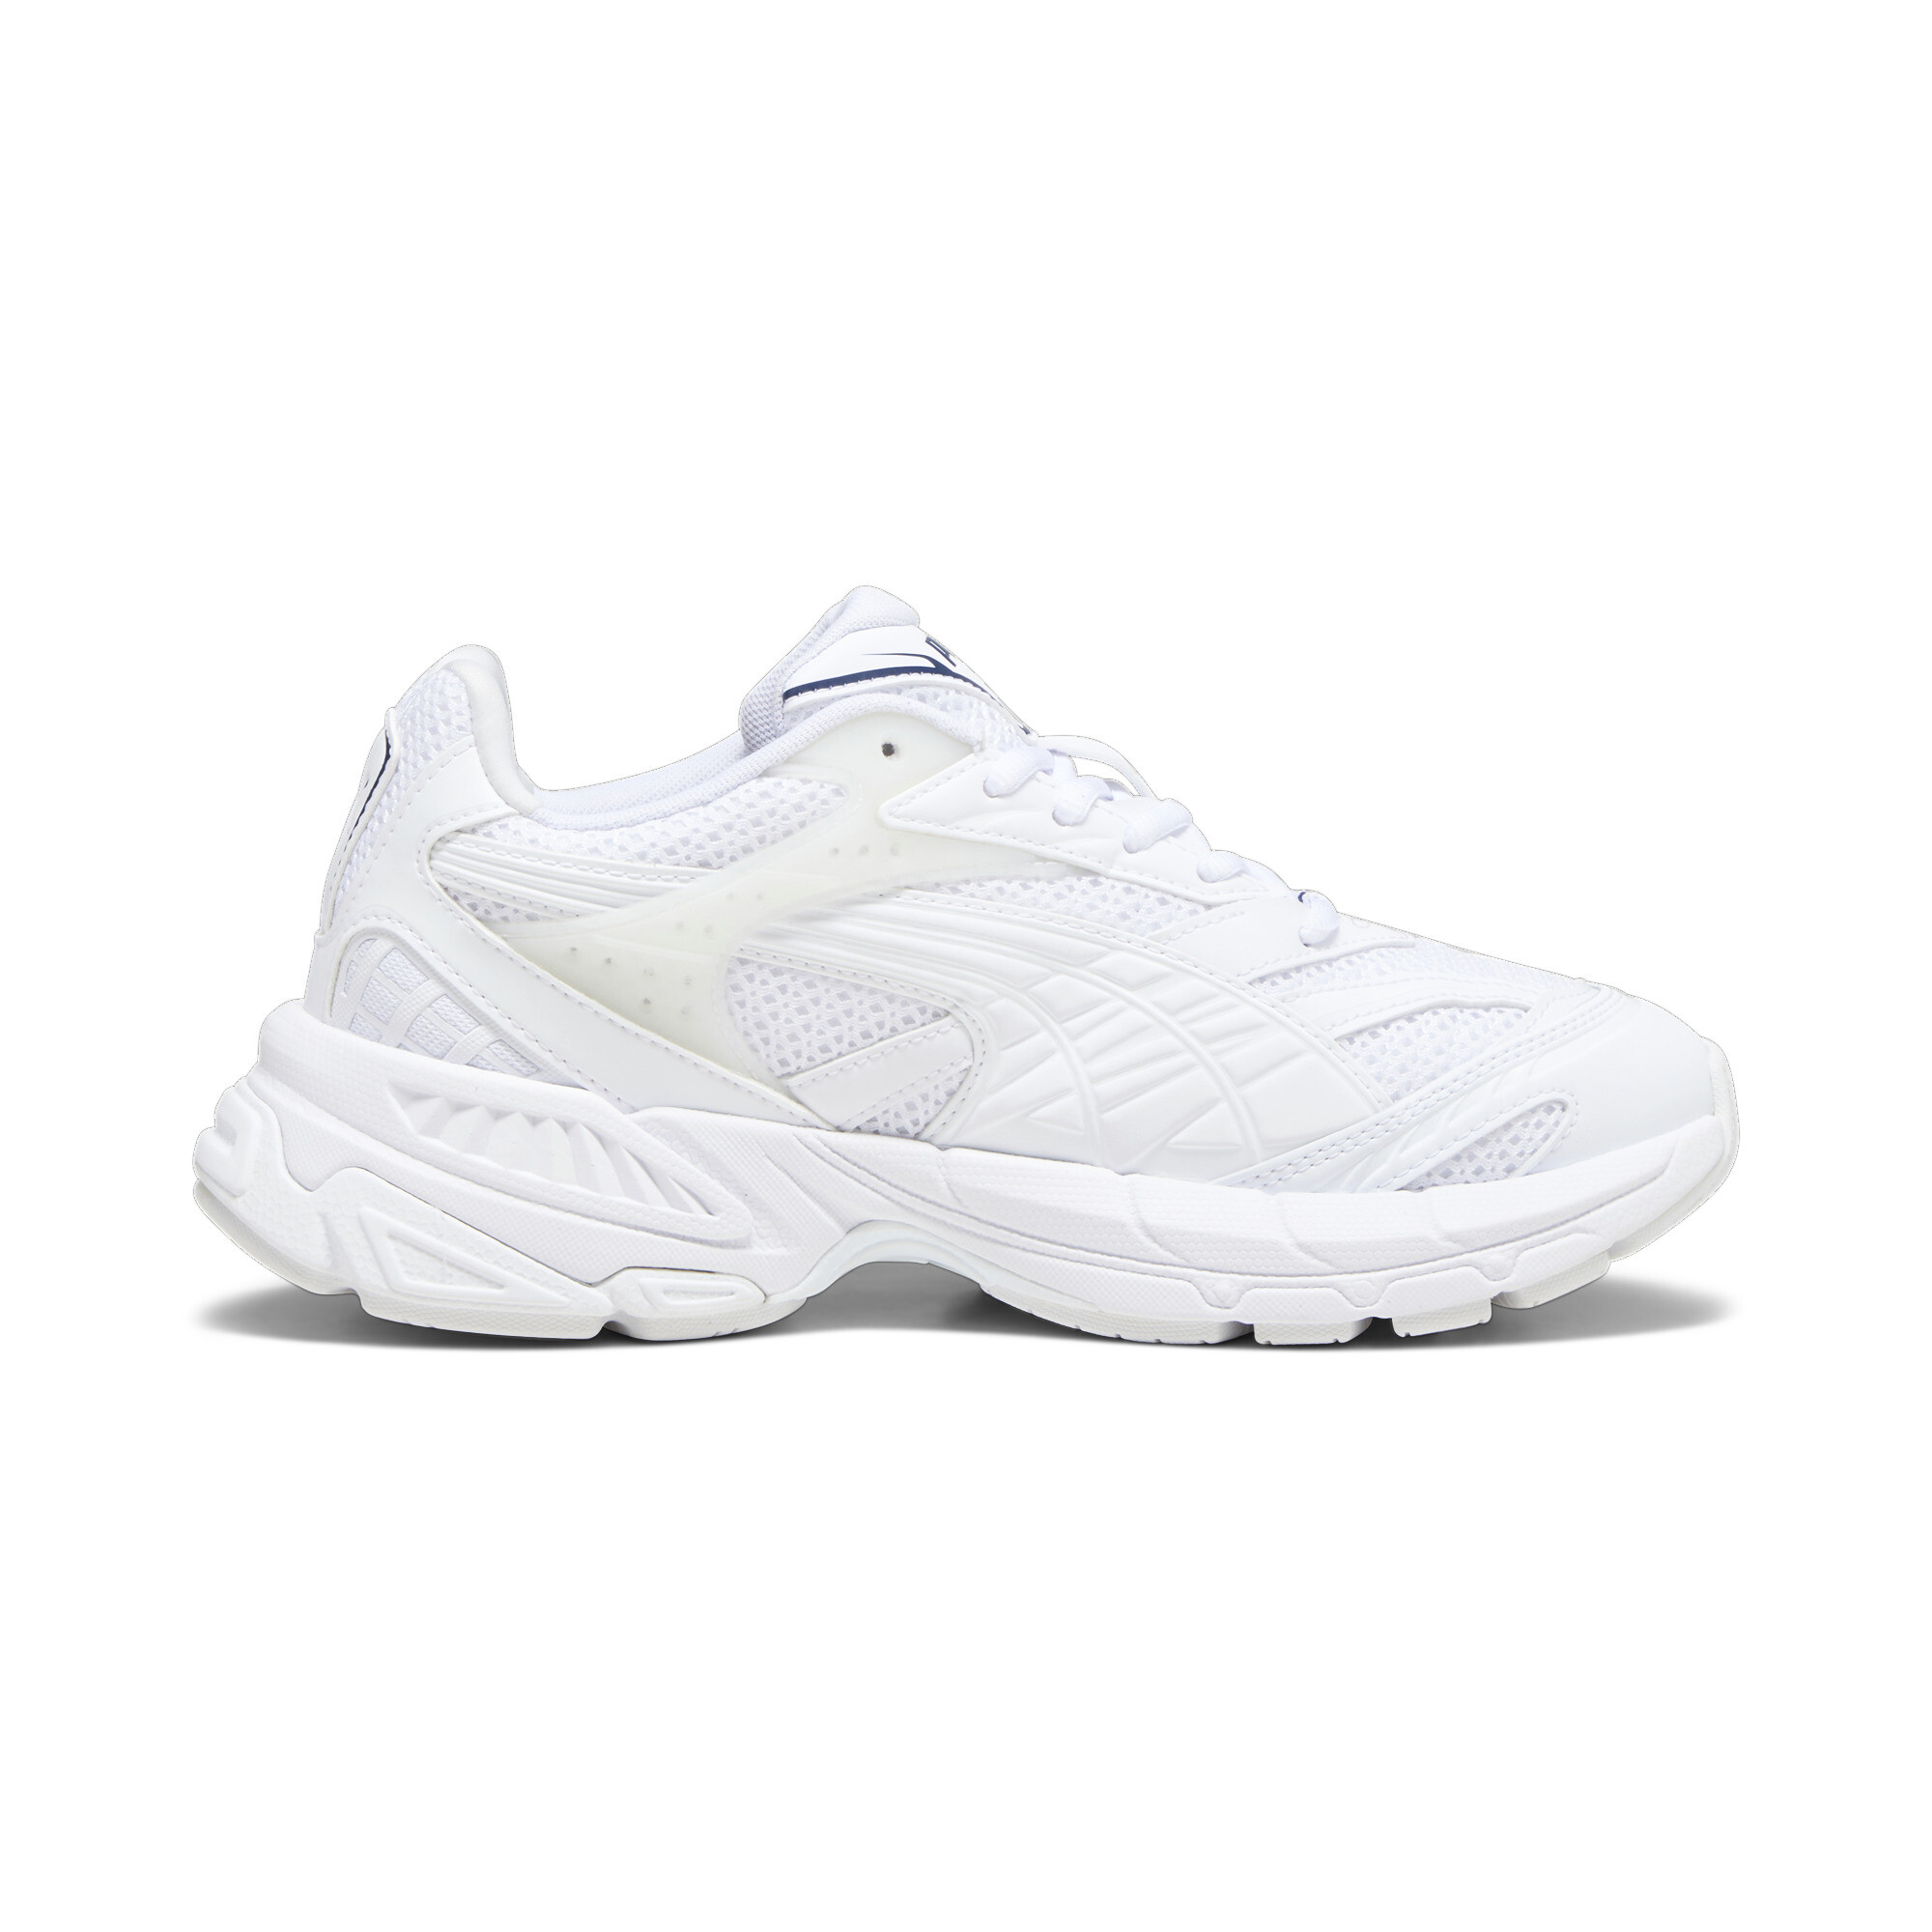 Puma Velophasis Technisch Sneakers, White, Size 40.5, Shoes